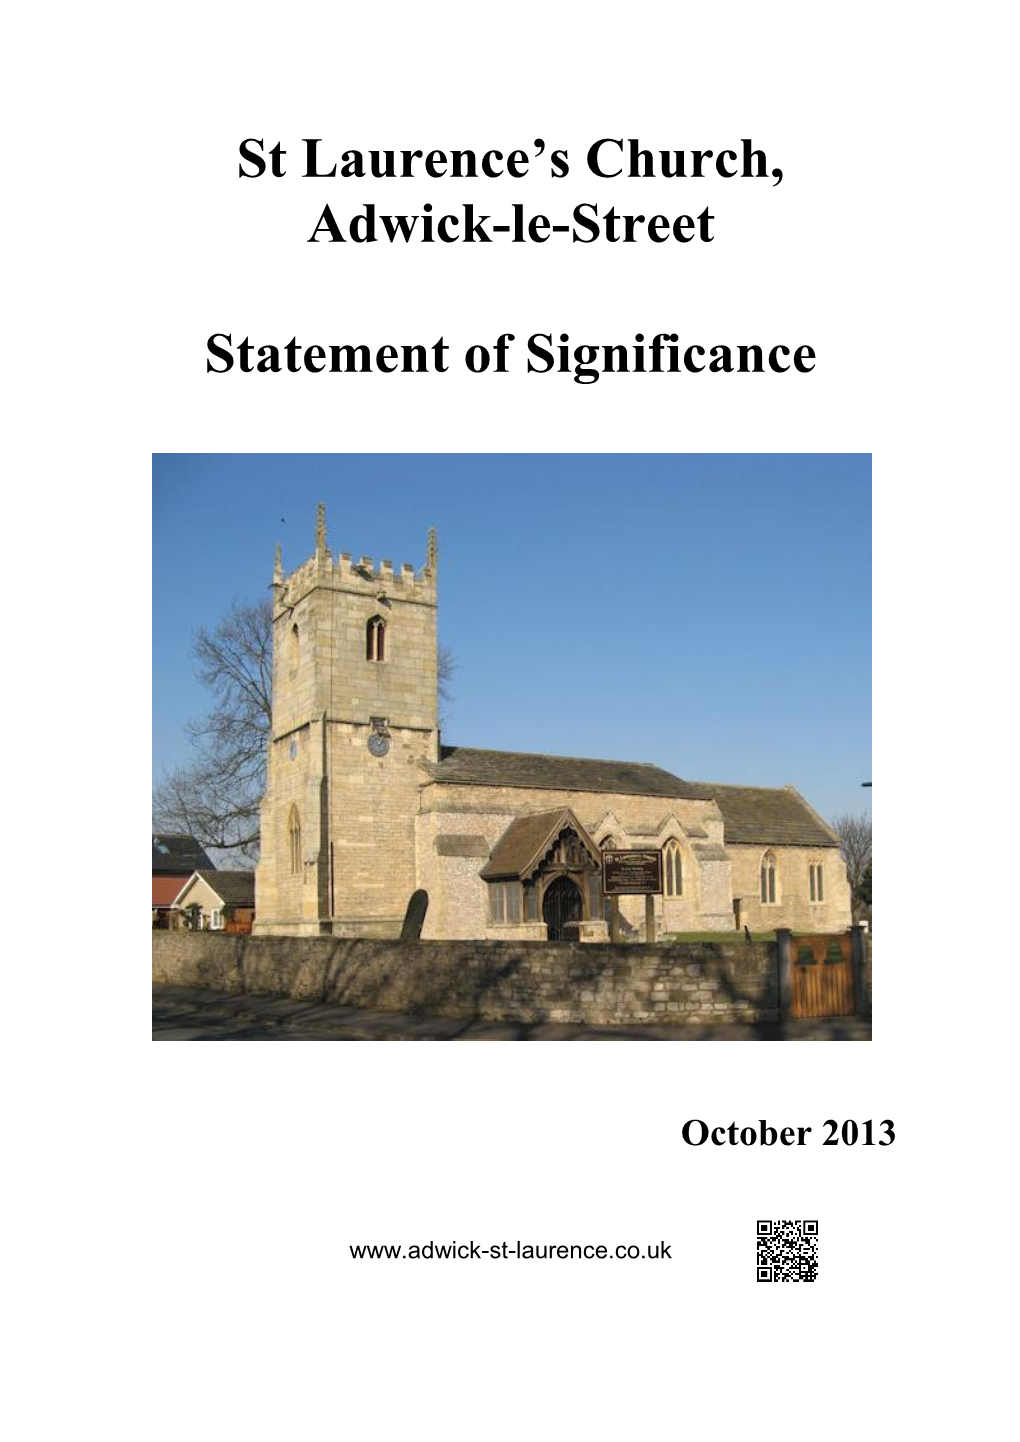 St Laurence's Church, Adwick-Le-Street Statement of Significance